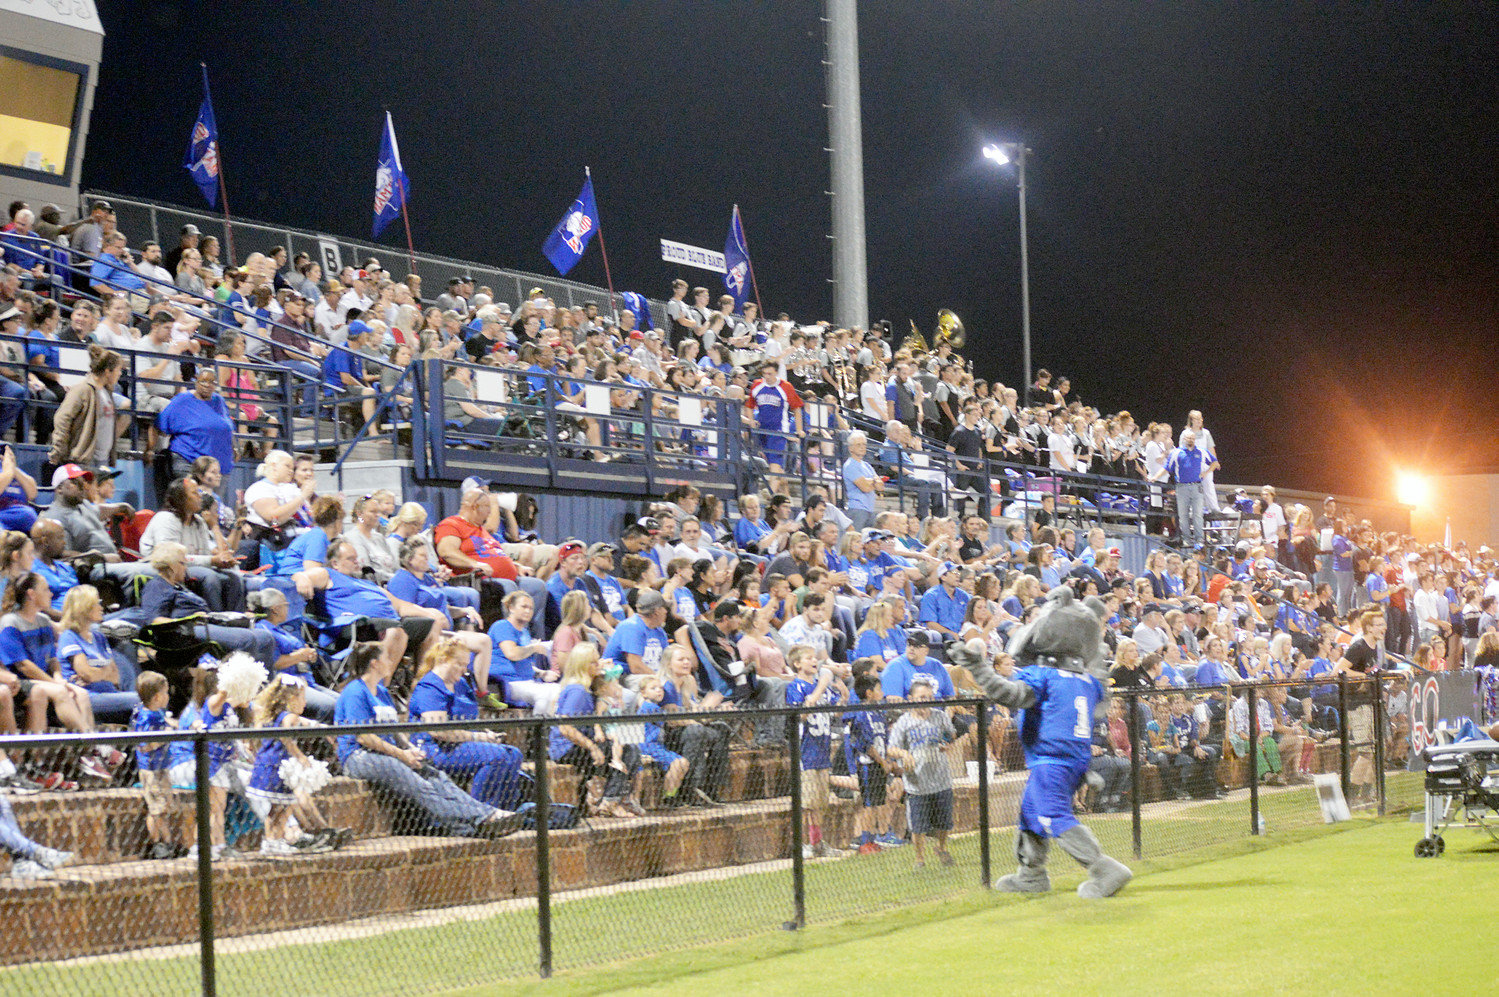 There was an overflow crowd at Friday’s Quitman homecoming game at Bud Moody Stadium.